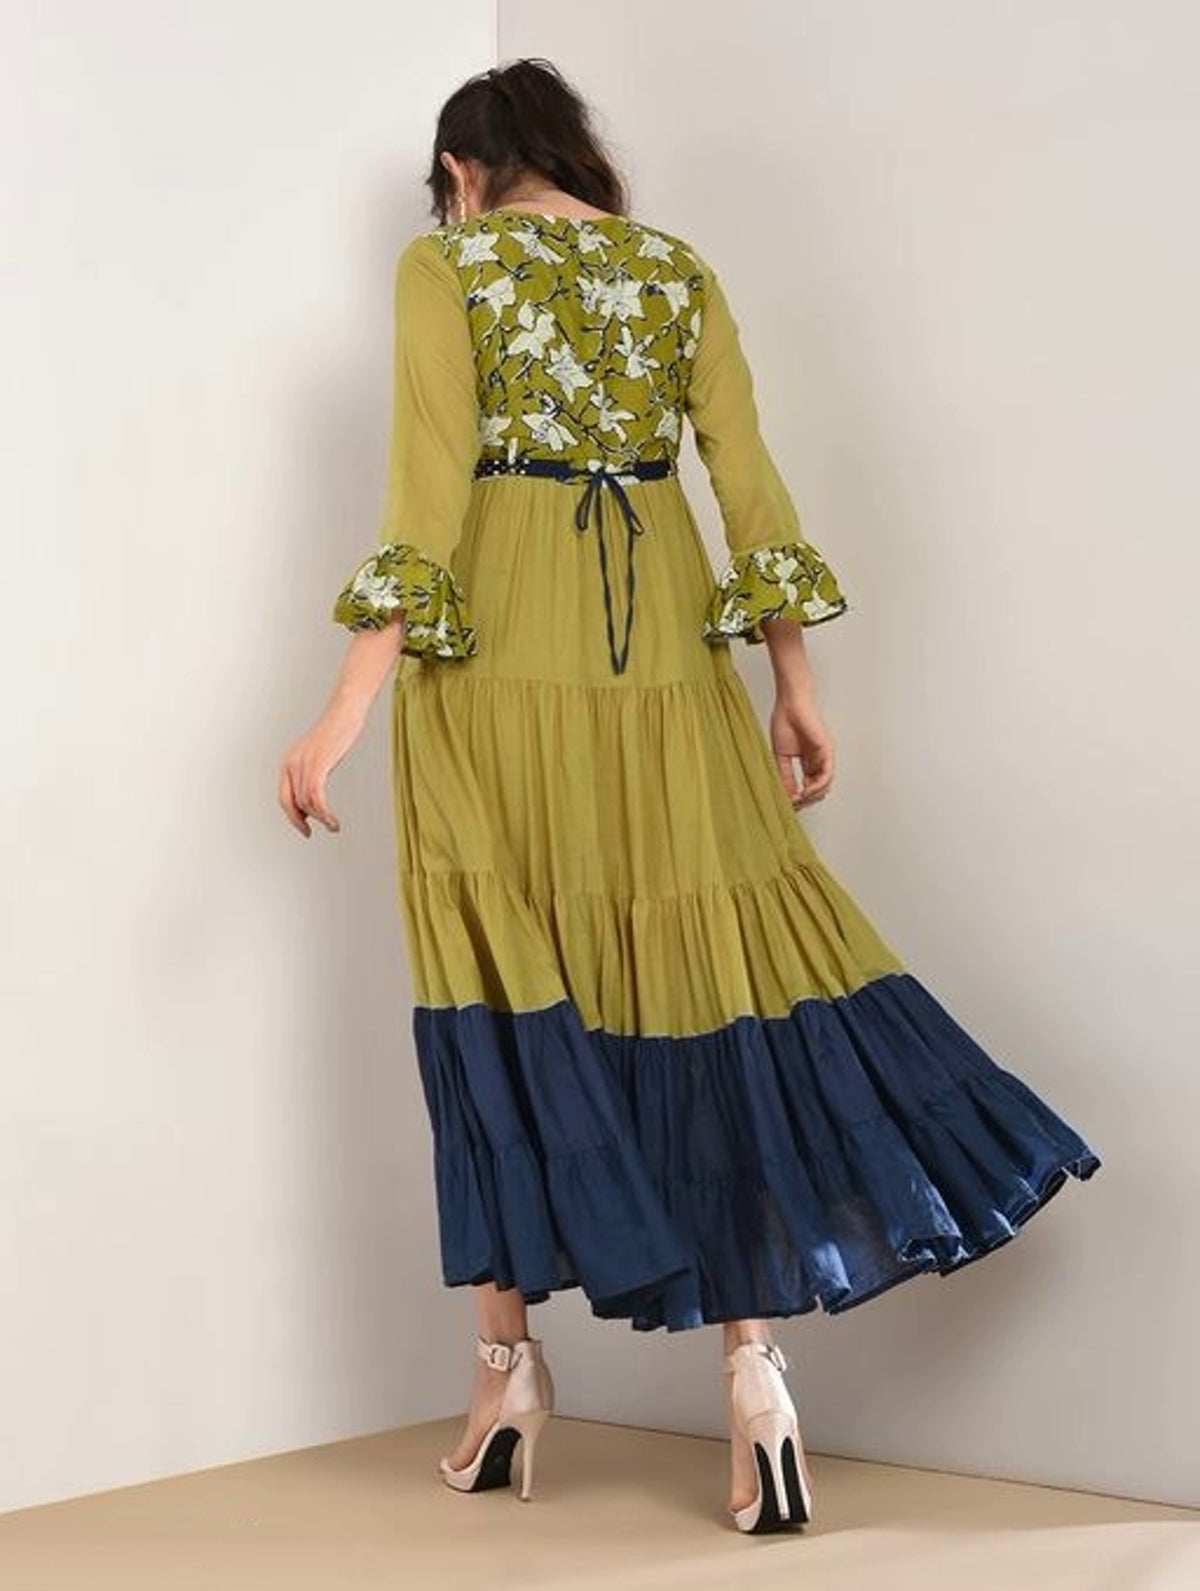 Women's Olive Green and Blue Ruffled Cotton Dress